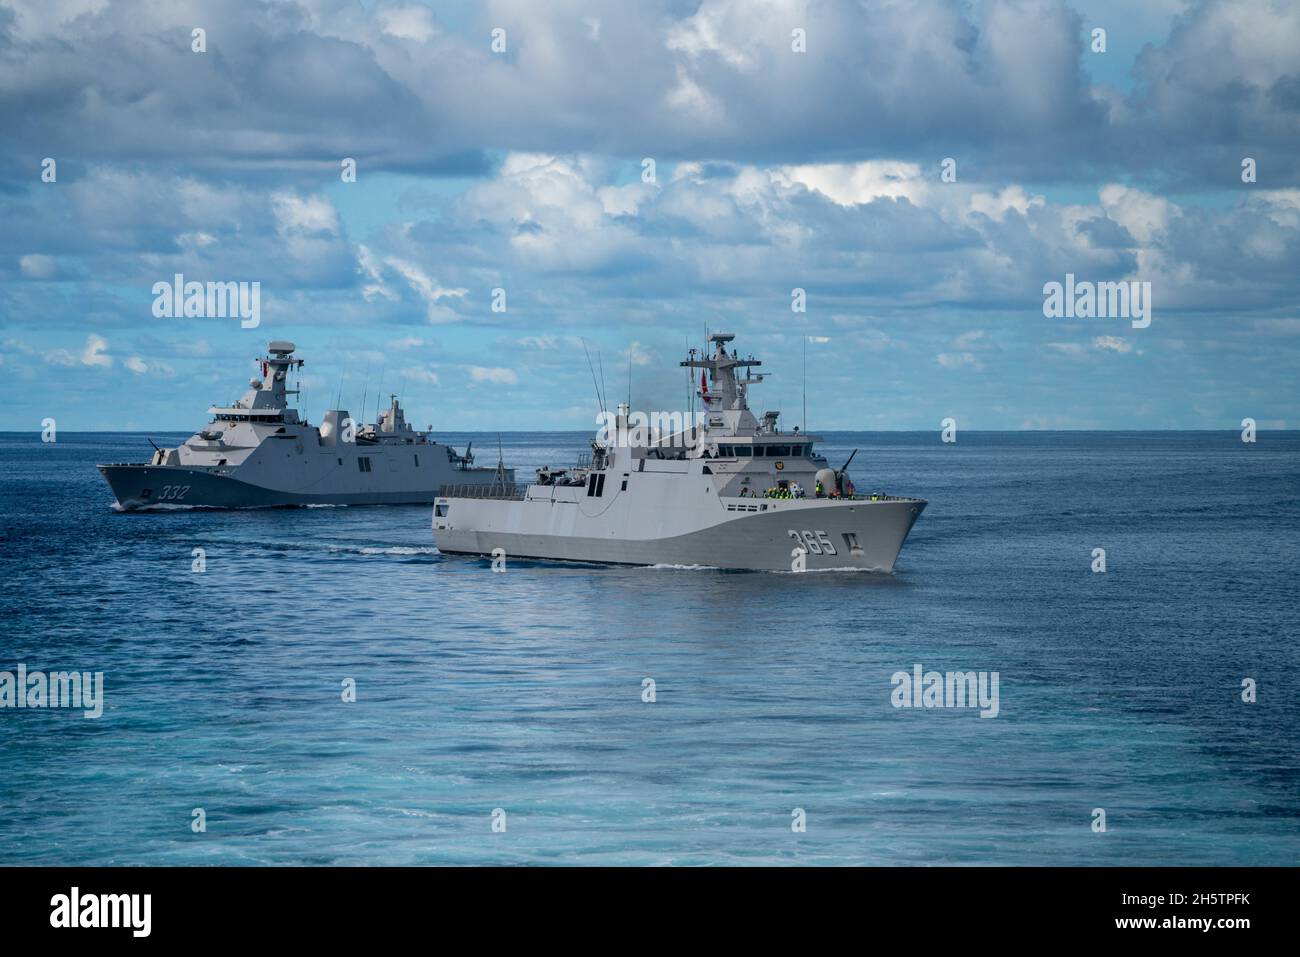 Java Sea, Indonesia. 09 November, 2021. The Indonesian Navy Diponegoro-class corvette KRI Diponegoro, center, and the Martadinata-class frigate KRI I Gusti Ngurah Rai sails alongside the Independence-variant littoral combat ship USS Jackson during Cooperation Afloat and Readiness and Training November 9, 2021in the Java Sea.  Credit: MC3 Andrew Langholf/Planetpix/Alamy Live News Stock Photo